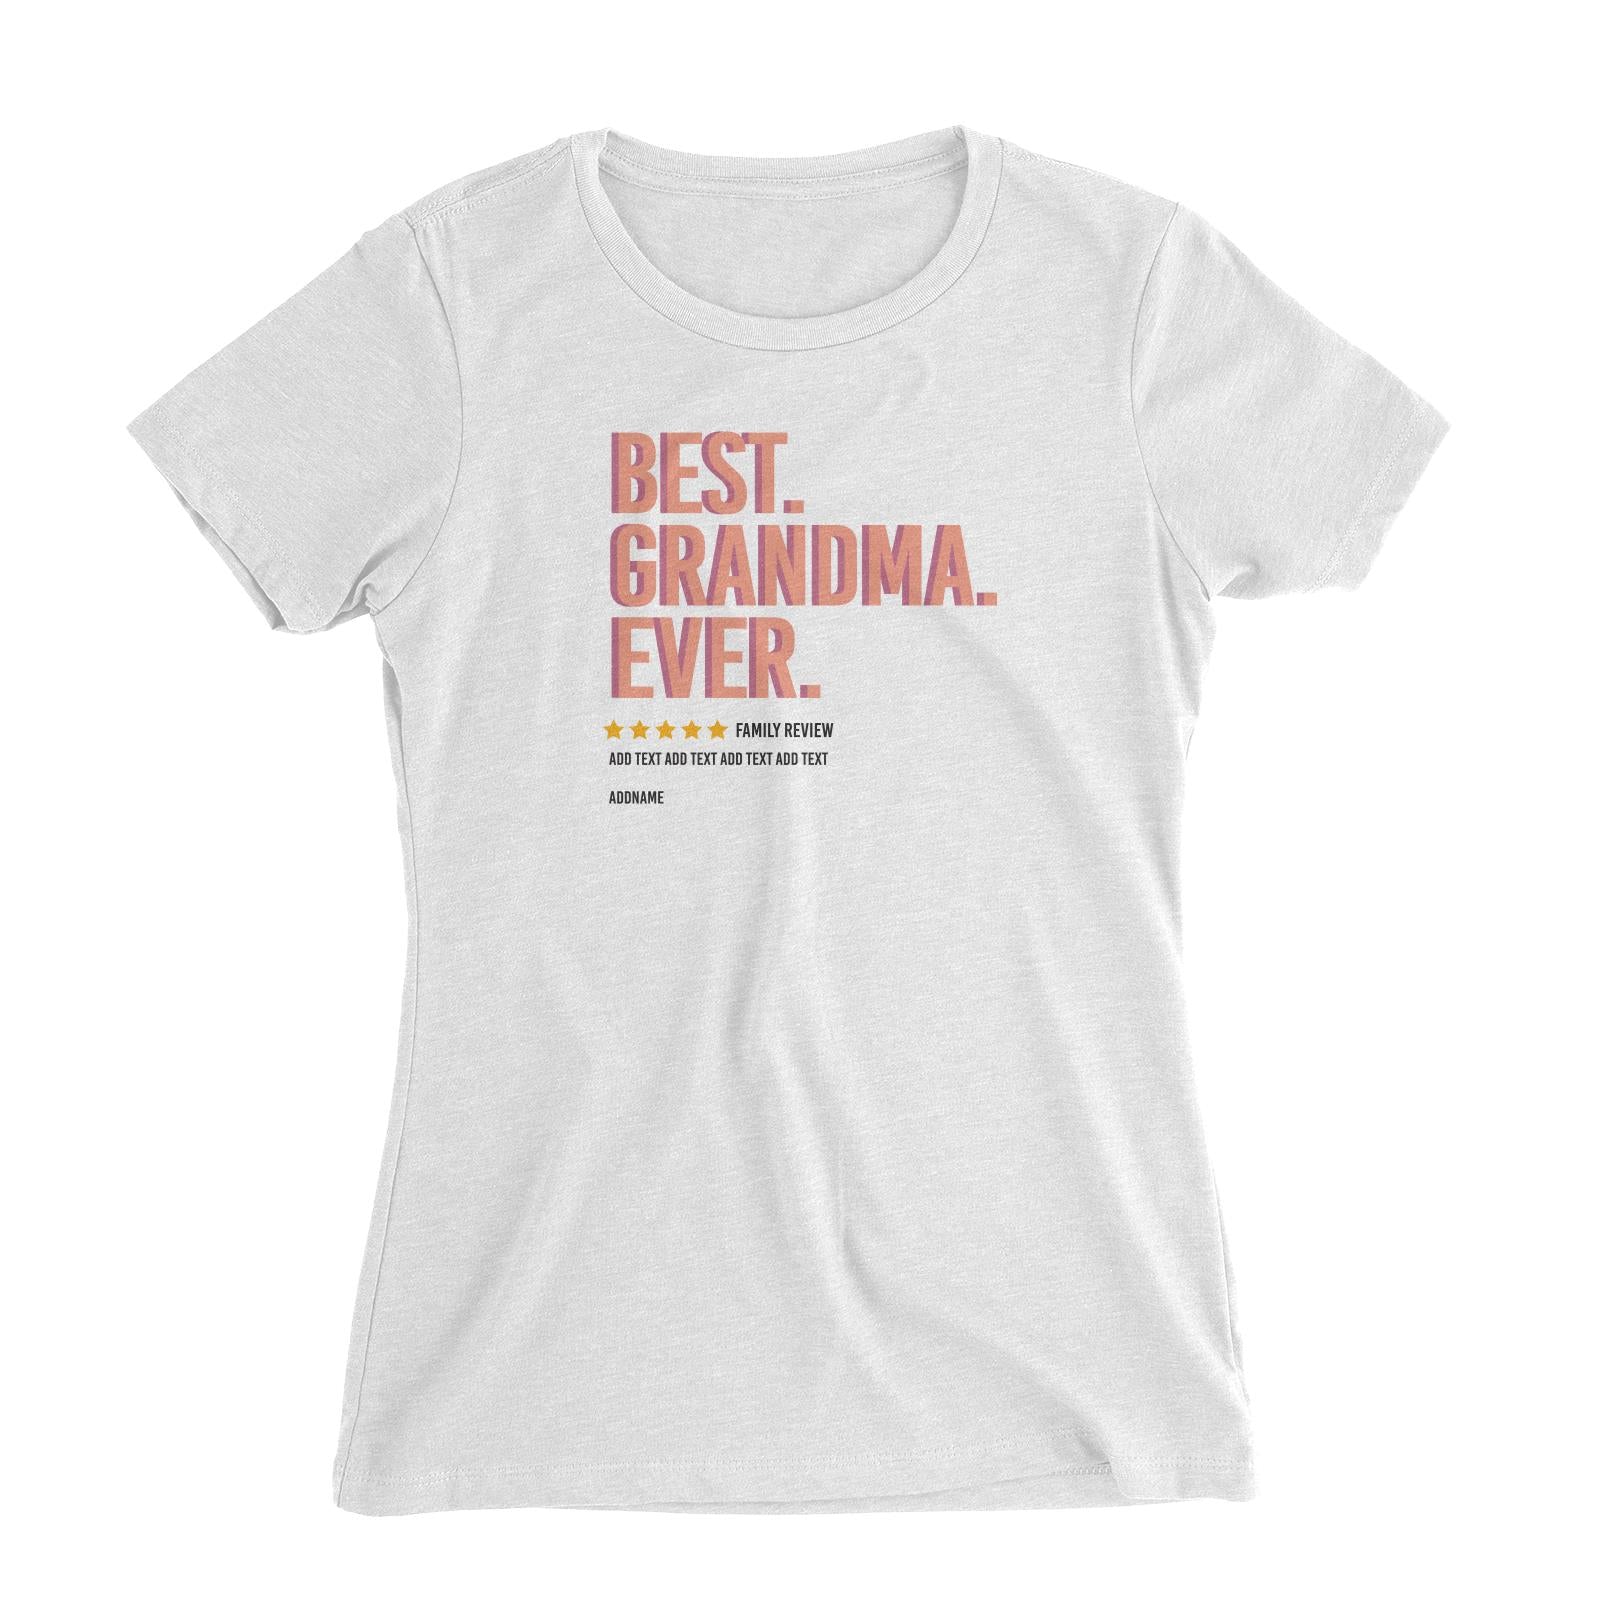 Awesome Mom 1 Best Grandma Ever Family Review Add Text And Addname Women's Slim Fit T-Shirt